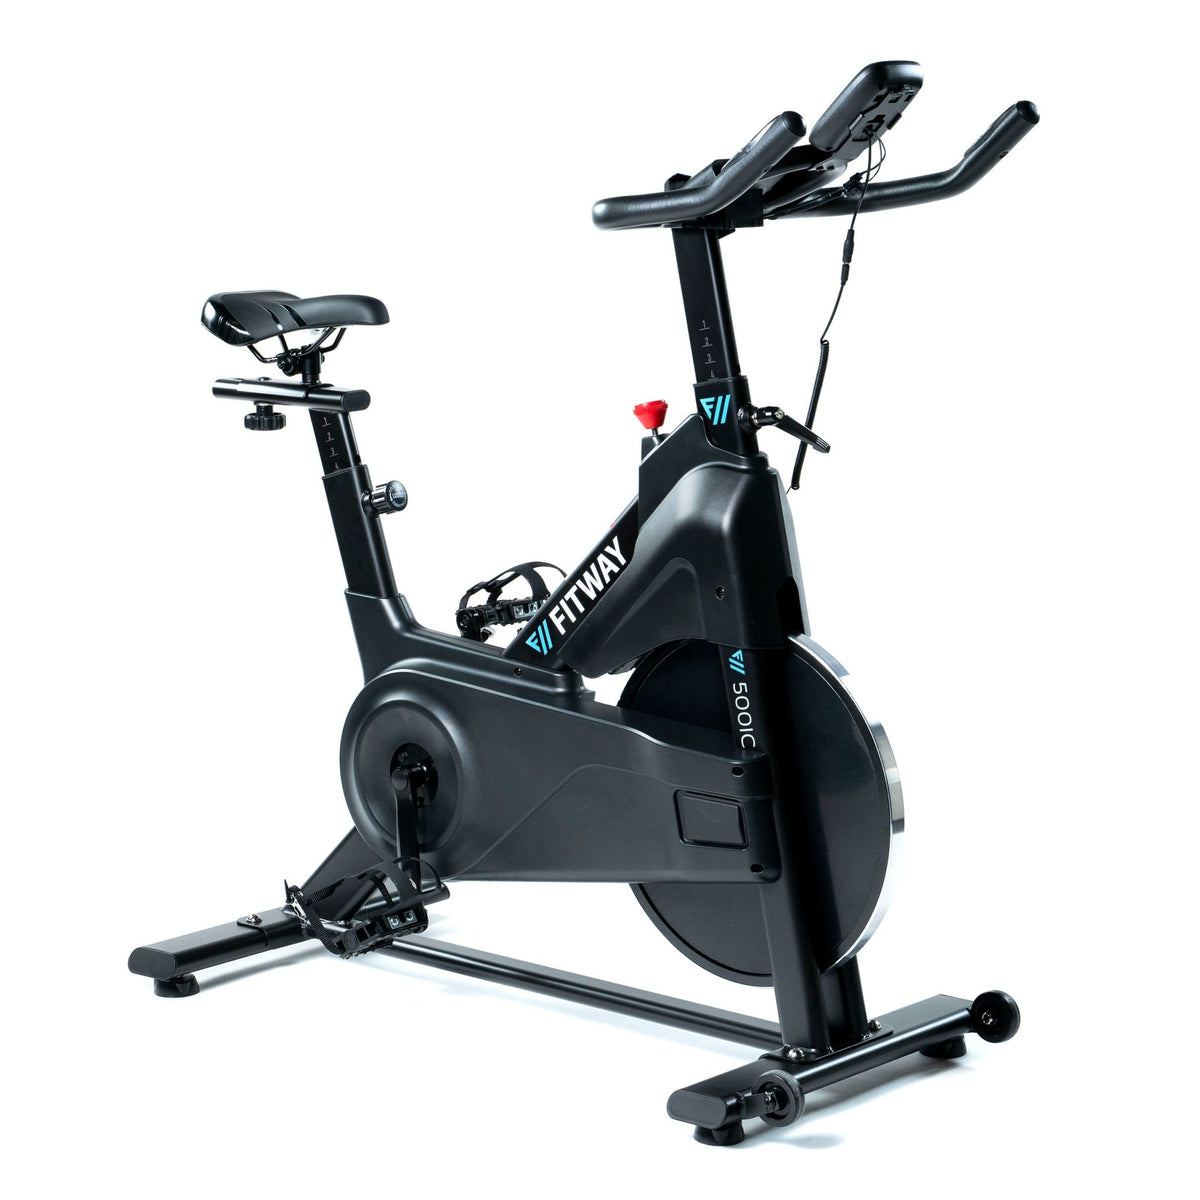 FitWay Equip. 500IC Indoor Cycle full view 